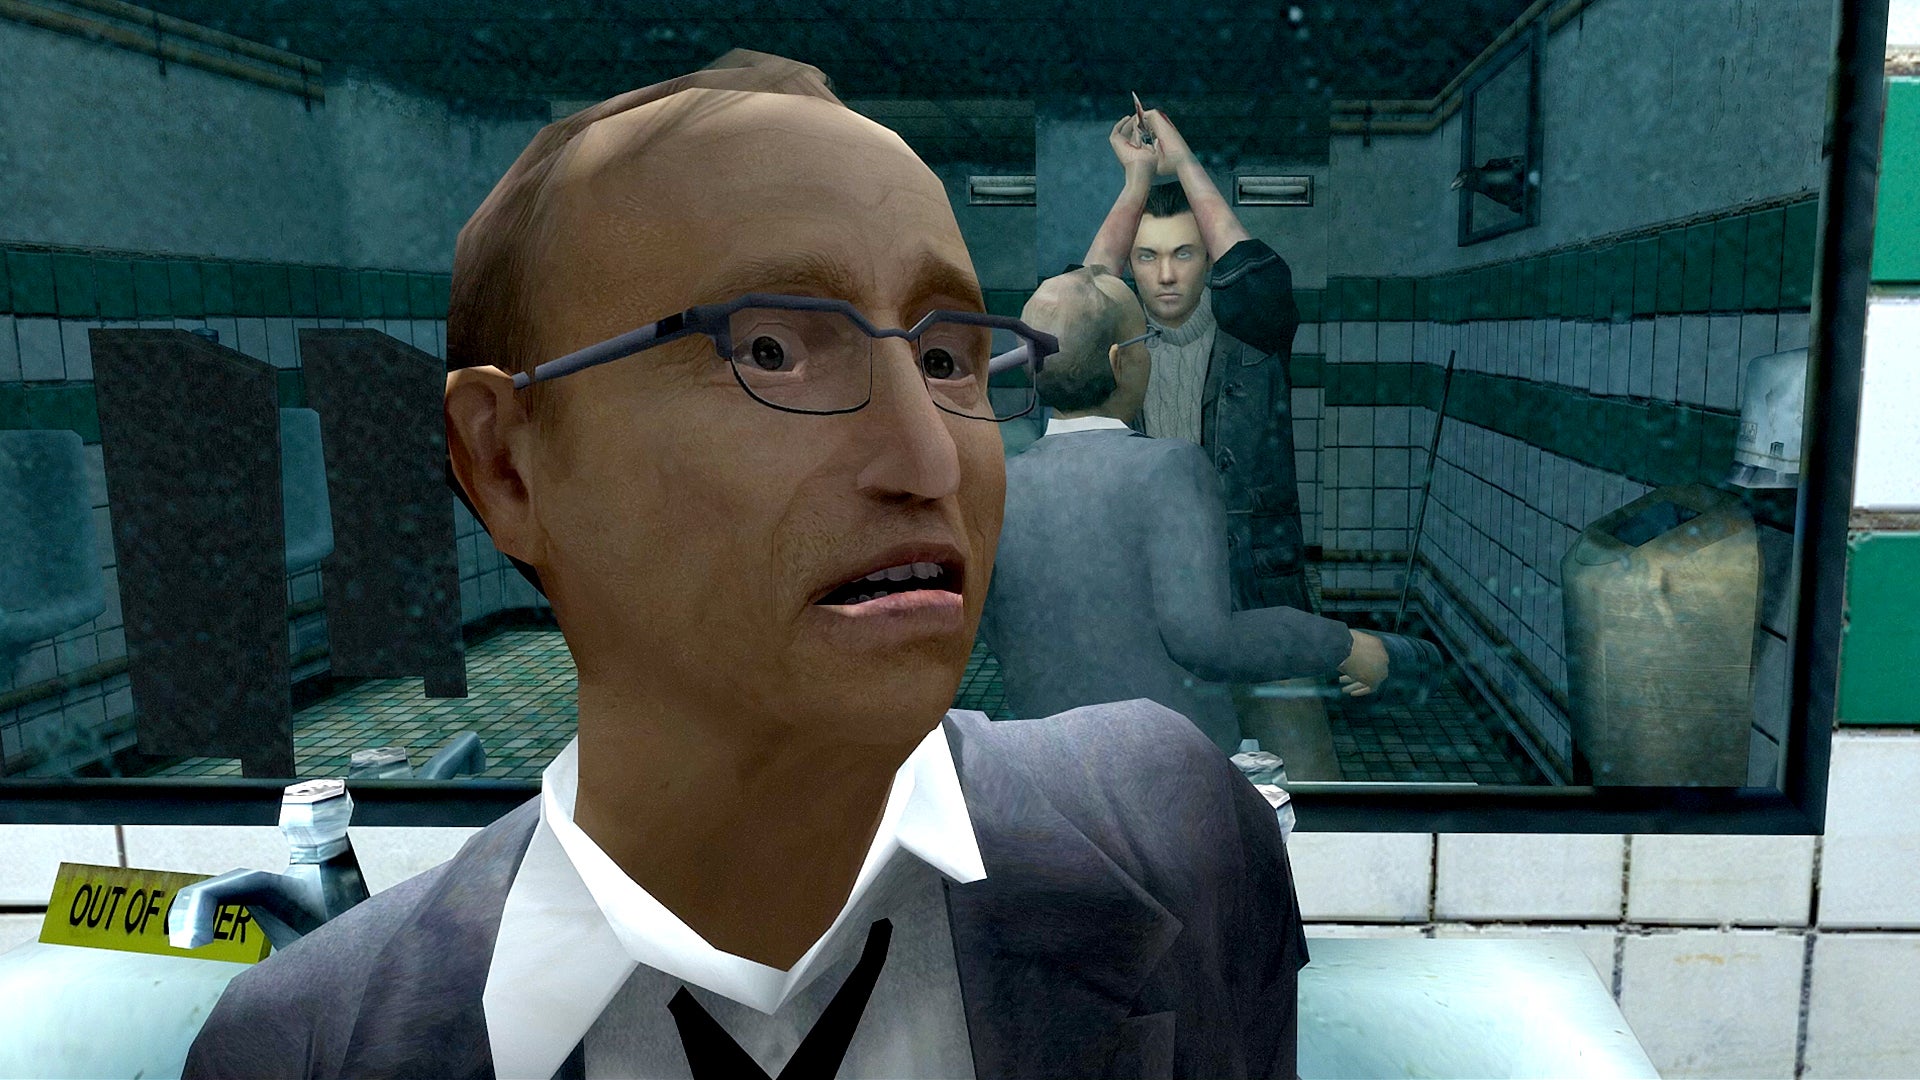 Indigo Prophecy Has One Of The Best Opening Levels Ever Made